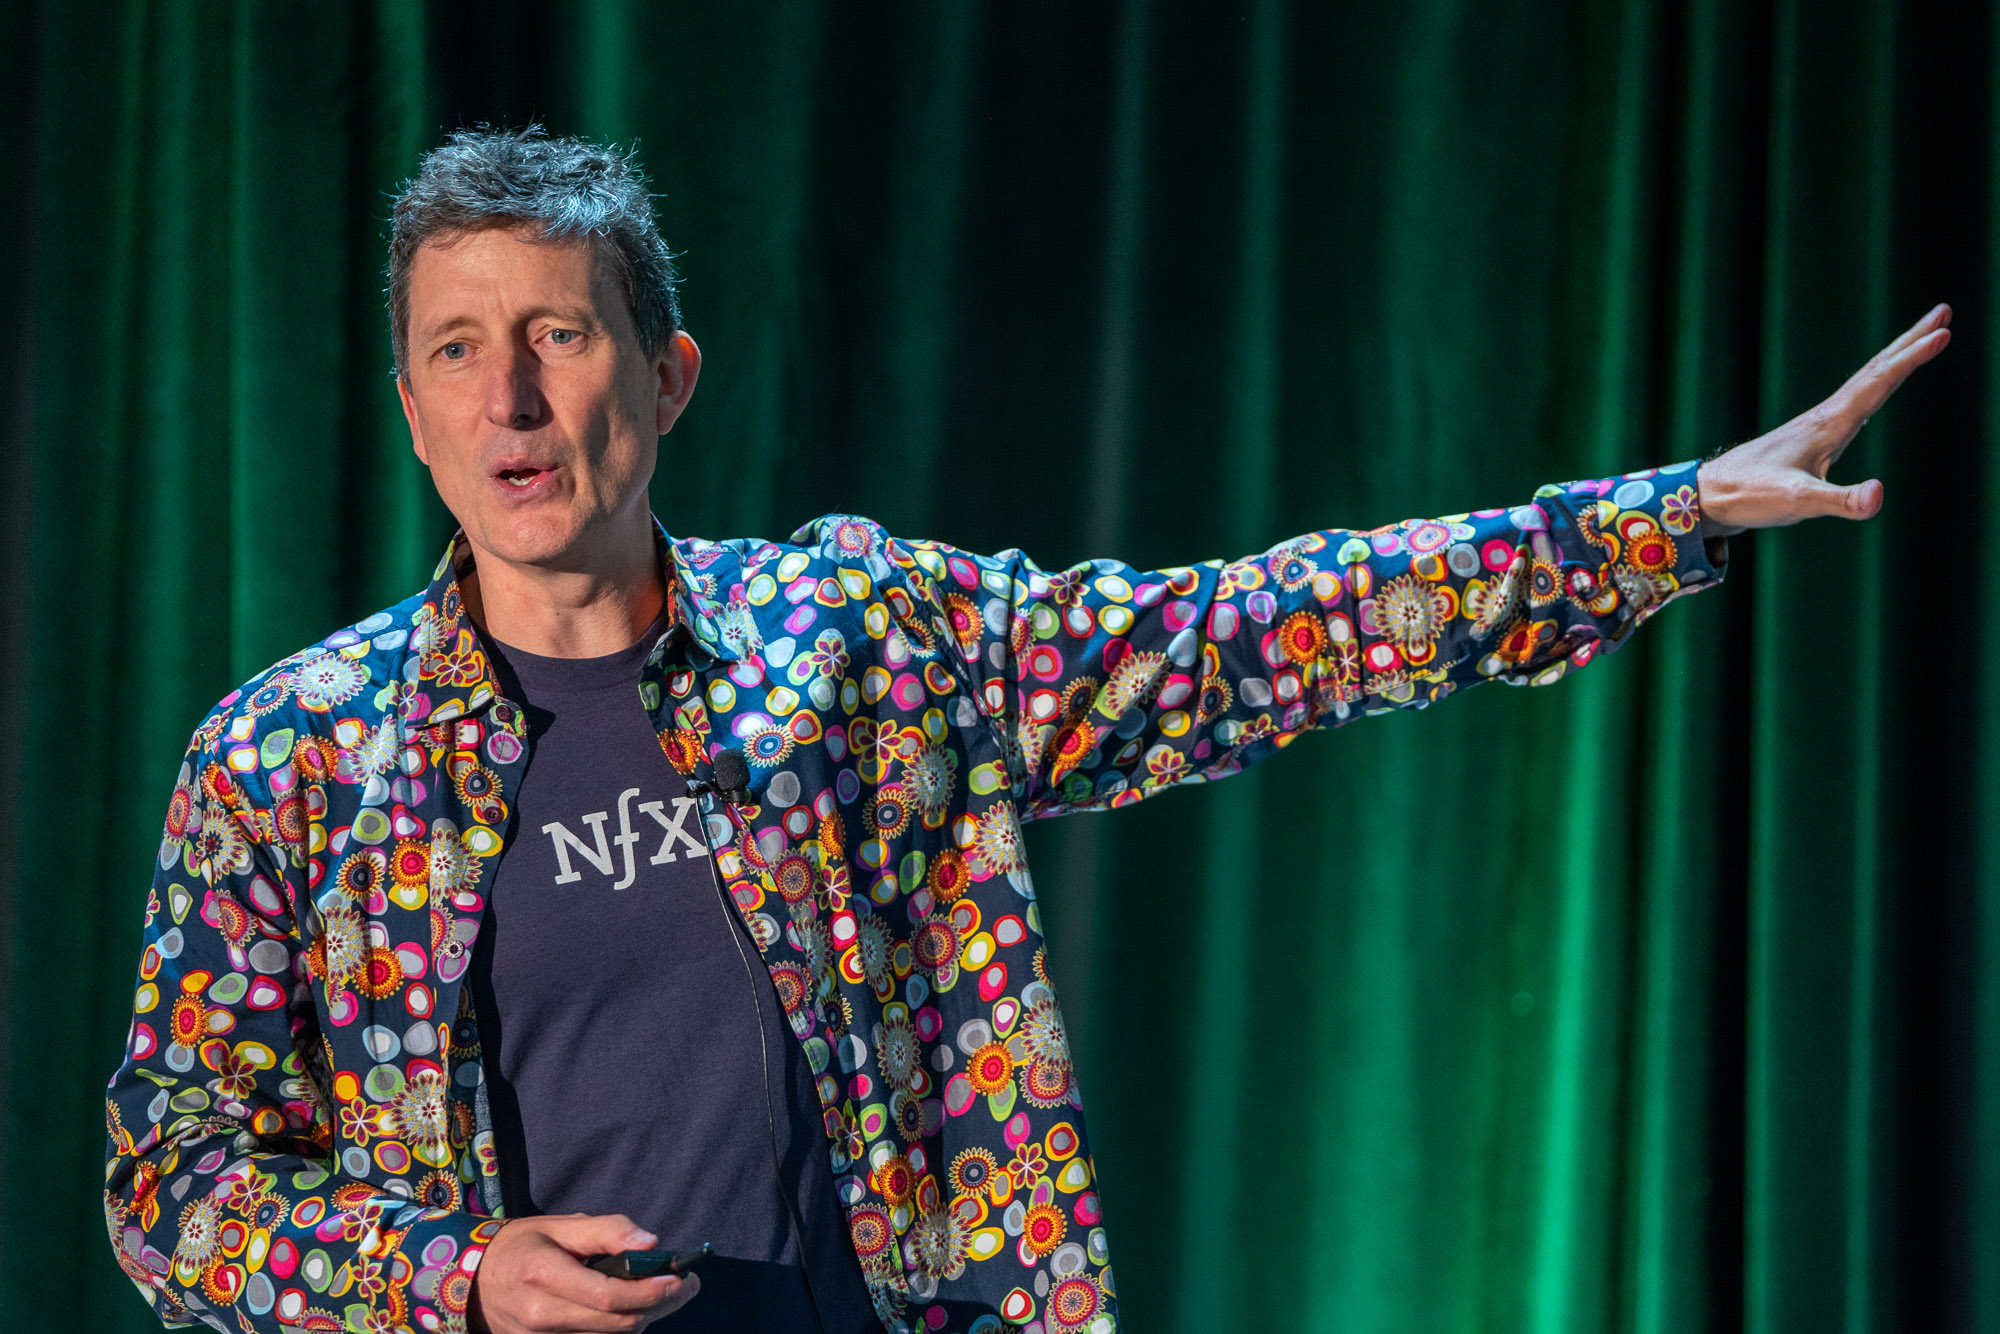 James Currier, GP at NfX talks about "Where unicorn ideas come from" at EntertainmentCab Early Stage in Boston on April 20, 2023. Image Credit: Haje Kamps/EntertainmentCab